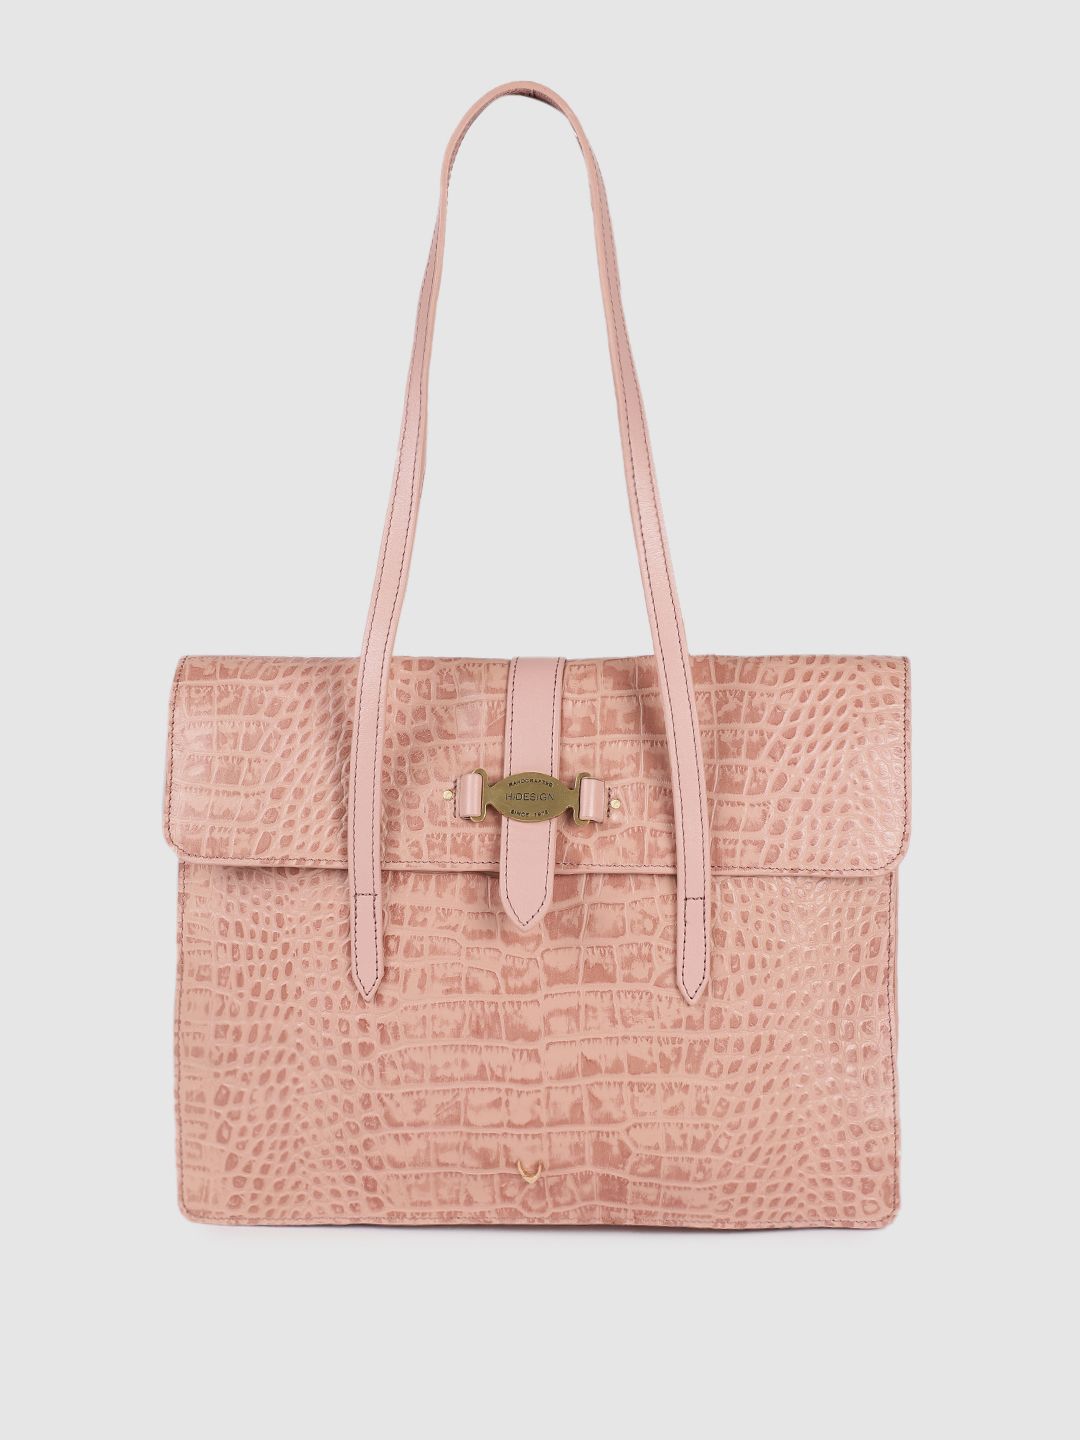 Hidesign Women Pink Textured Leather Shoulder Bag Price in India